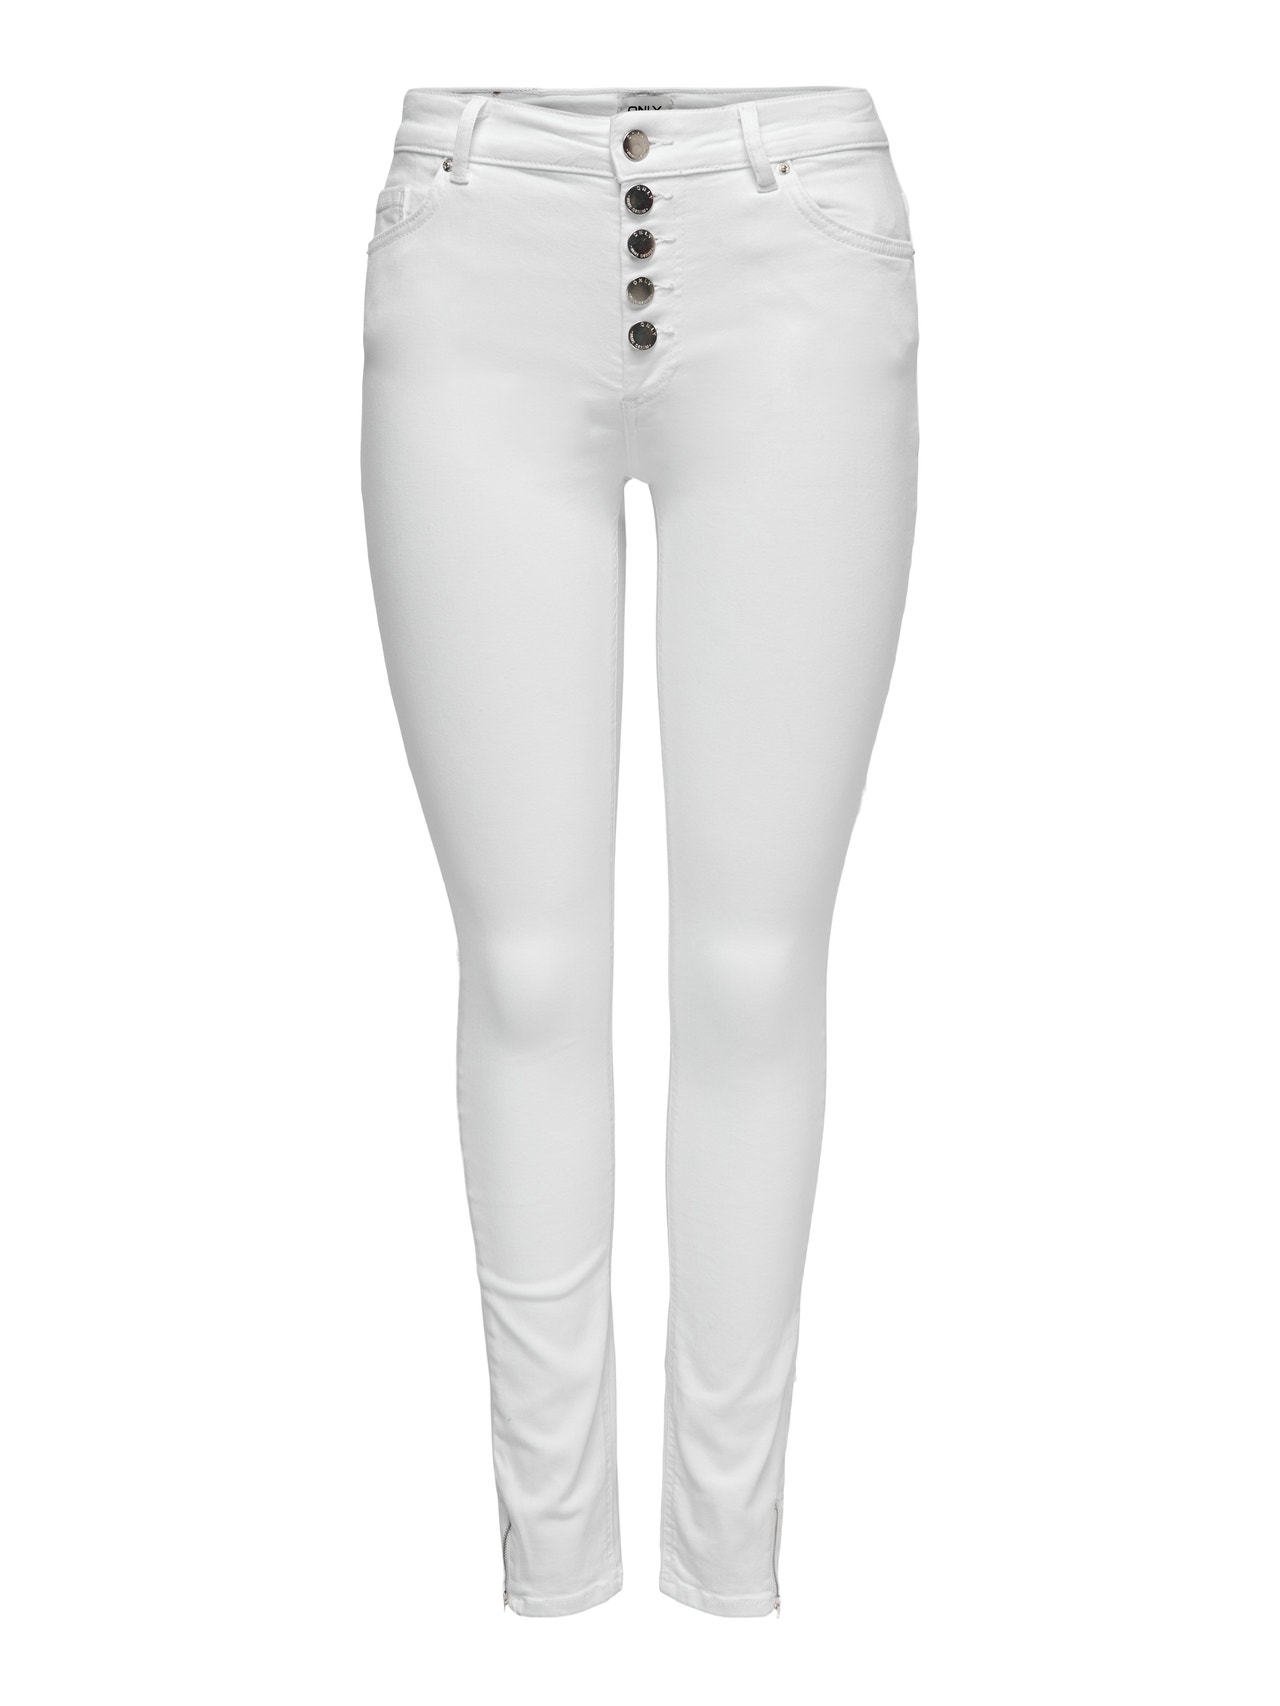 ONLY ONLBOBBY LIFE MID waist SKinny  ANKle ZIP jeans -White - 15266315